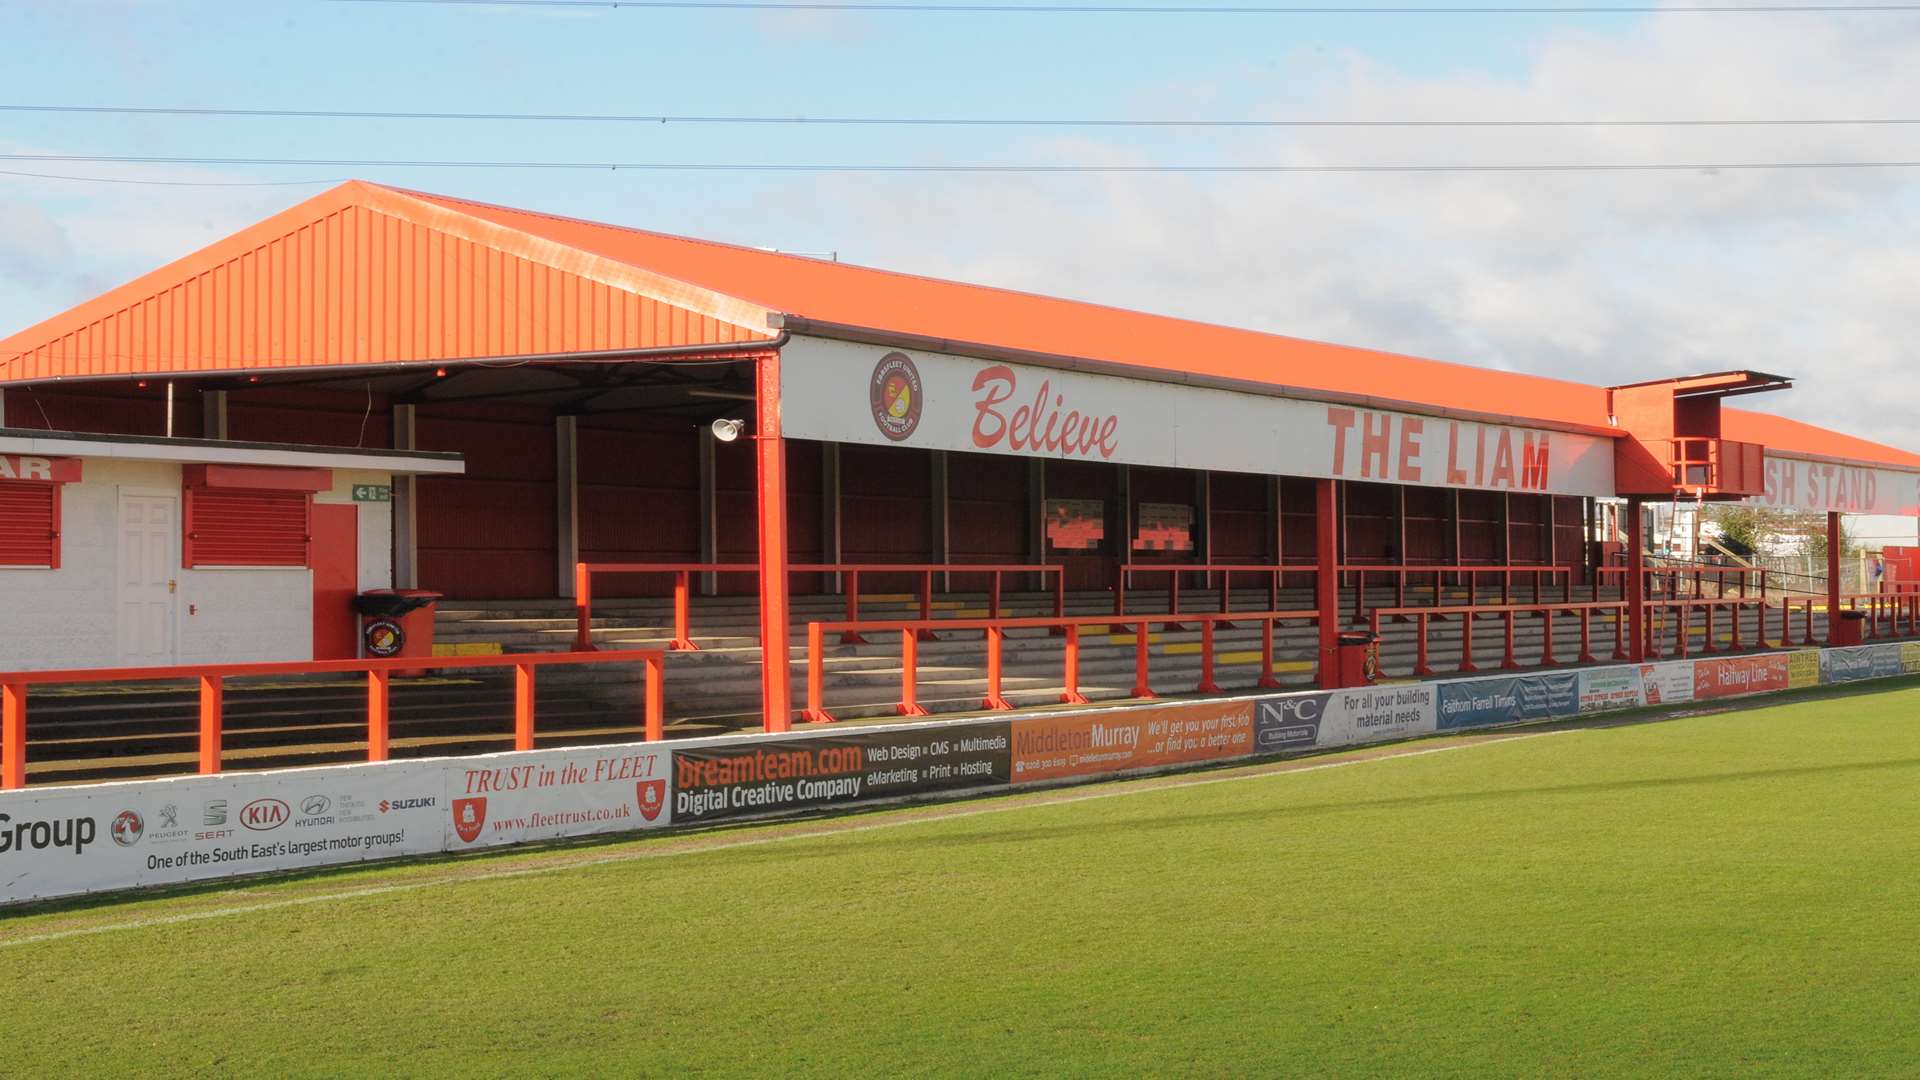 Ebbsfleet's new main stand will replace the existing Liam Daish Stand Picture: Steve Crispe